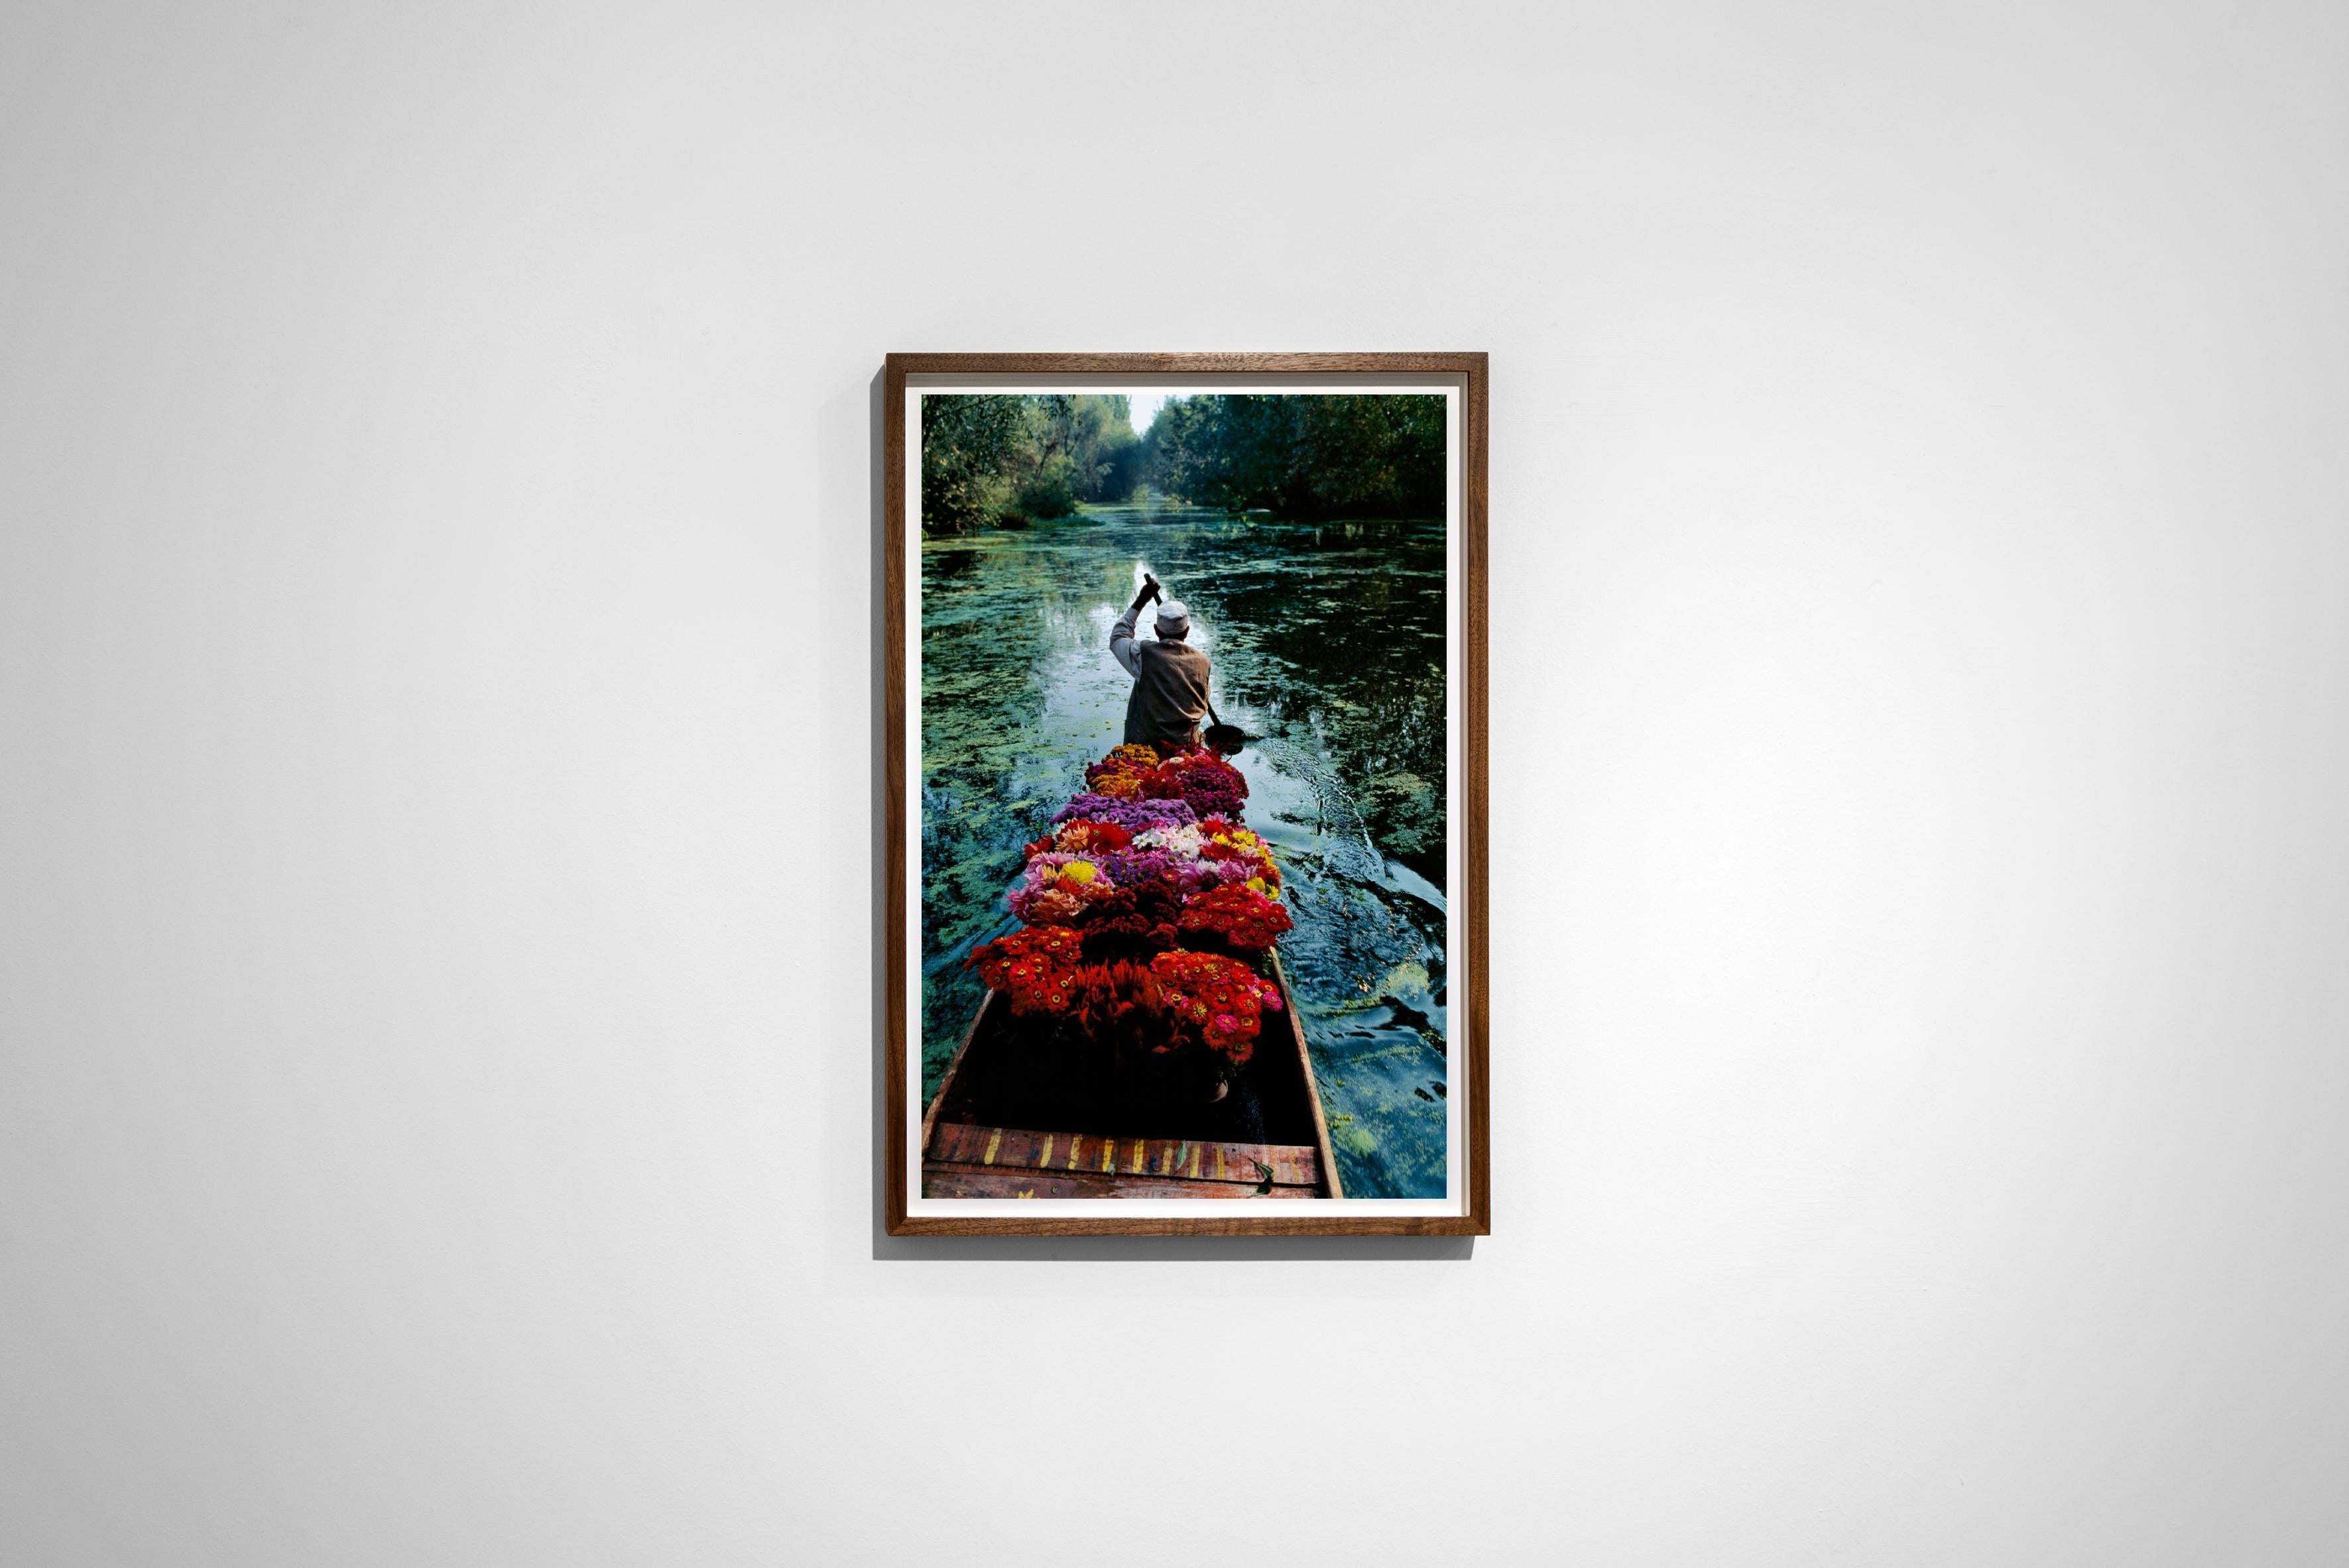 Flower Seller, Dal Lake, Srinigar, Kashmir, 1996 - Steve McCurry 
Signed and affixed with photographer's edition label and numbered on reverse
Digital c-type print
Printed on 20 x 24 inch paper
Edition of 90

Steve McCurry (born 1950) is best known